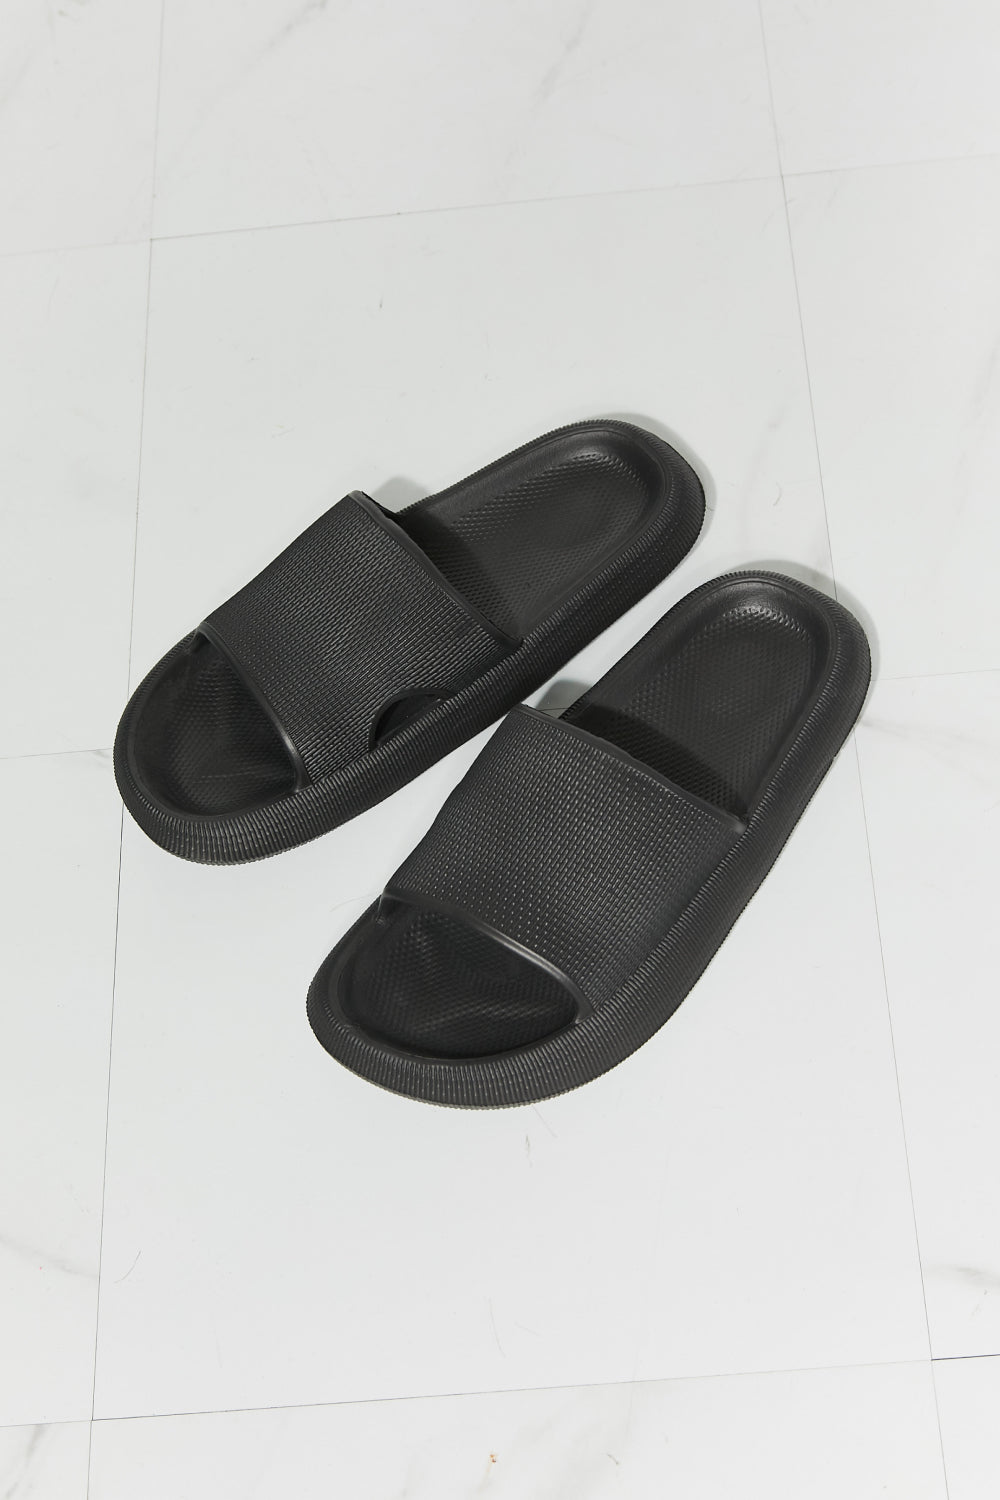 MMShoes Arms Around Me Open Toe Slide in Black - Cheeky Chic Boutique